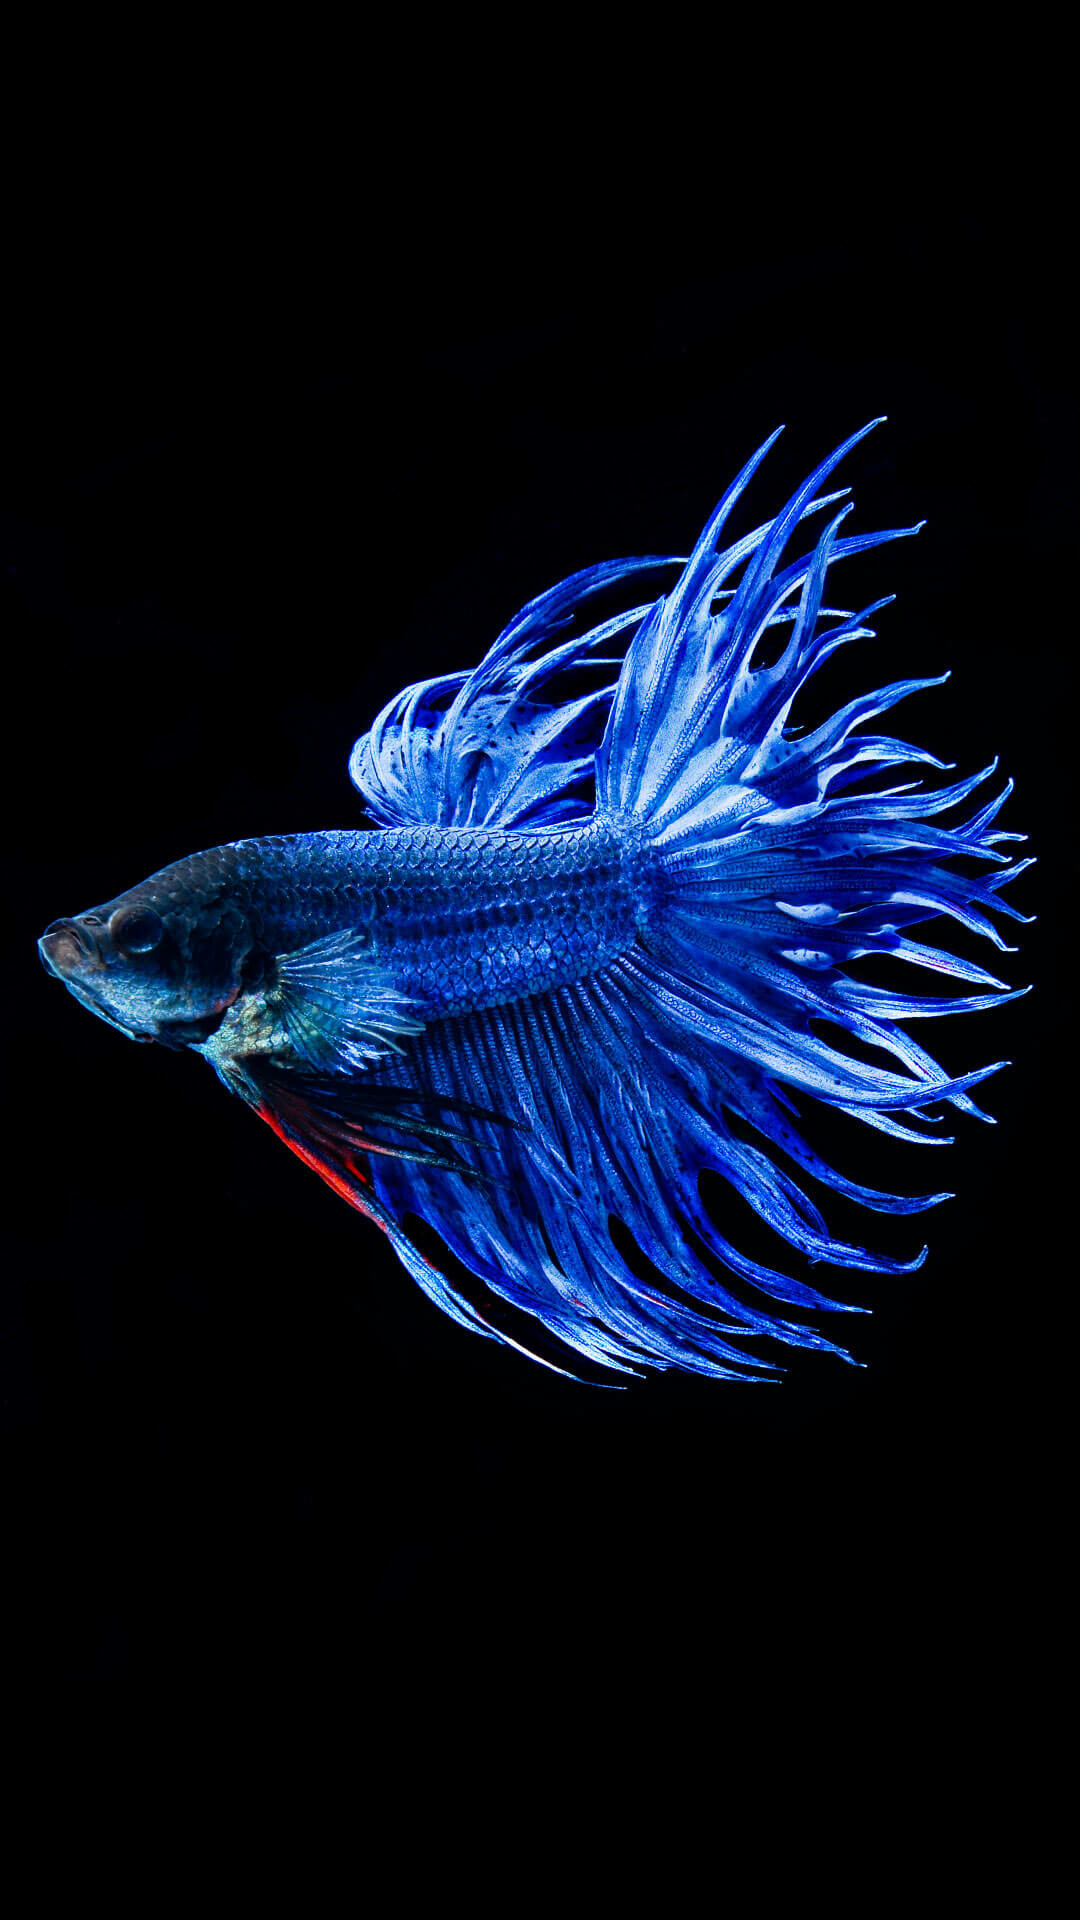 iPhone fish wallpapers, Pixelstalk collection, Beautiful fish imagery, Stunning backgrounds, 1080x1920 Full HD Phone